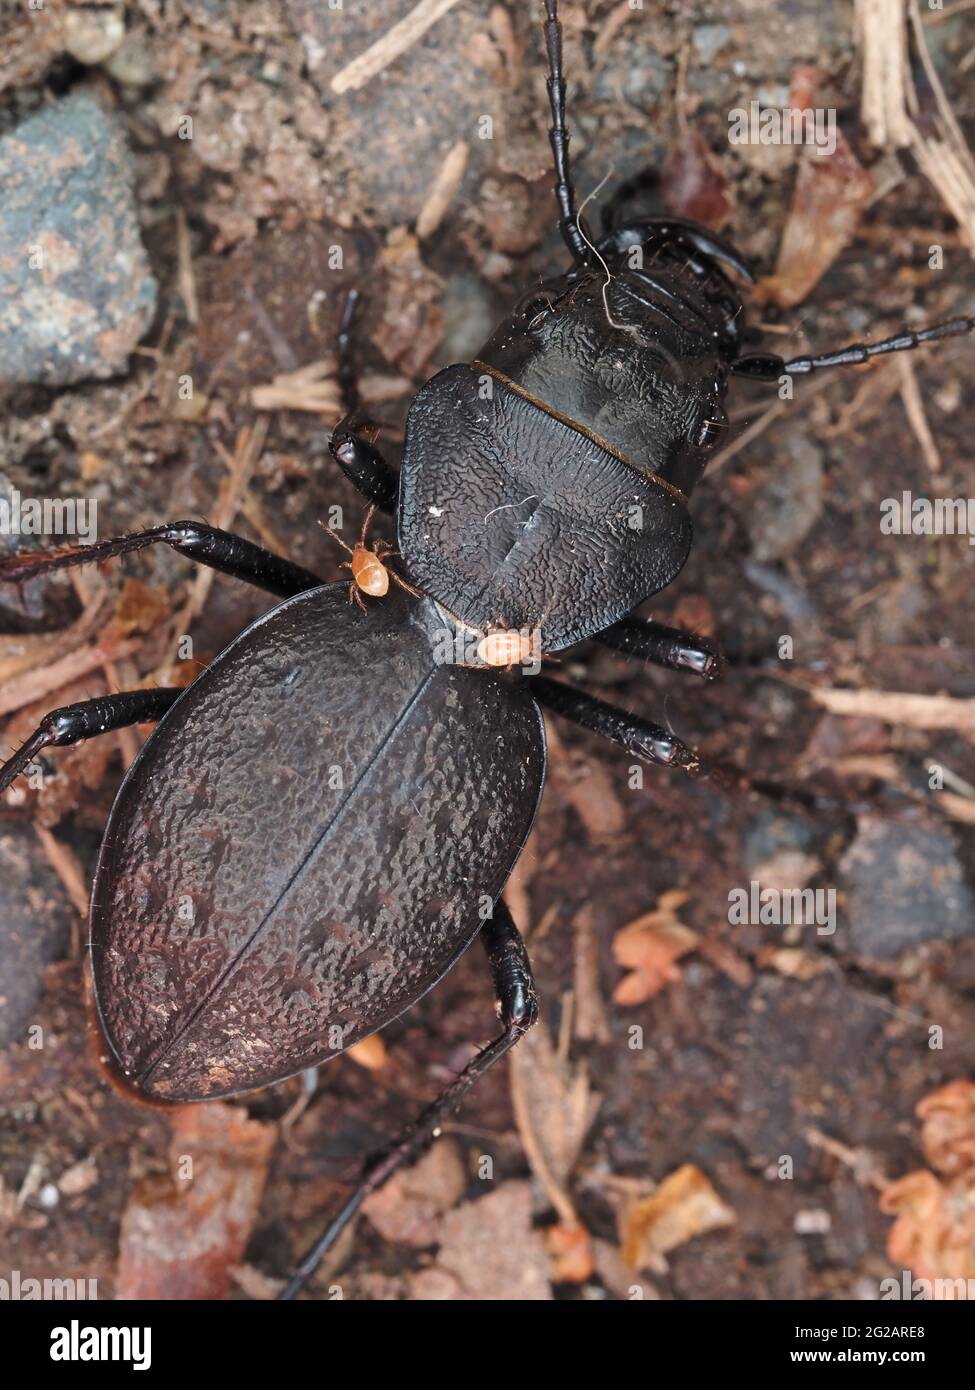 A beetle identified as Omus dejeanii - Greater Night-stalking Tiger Beetle - with phoretic mites Stock Photo